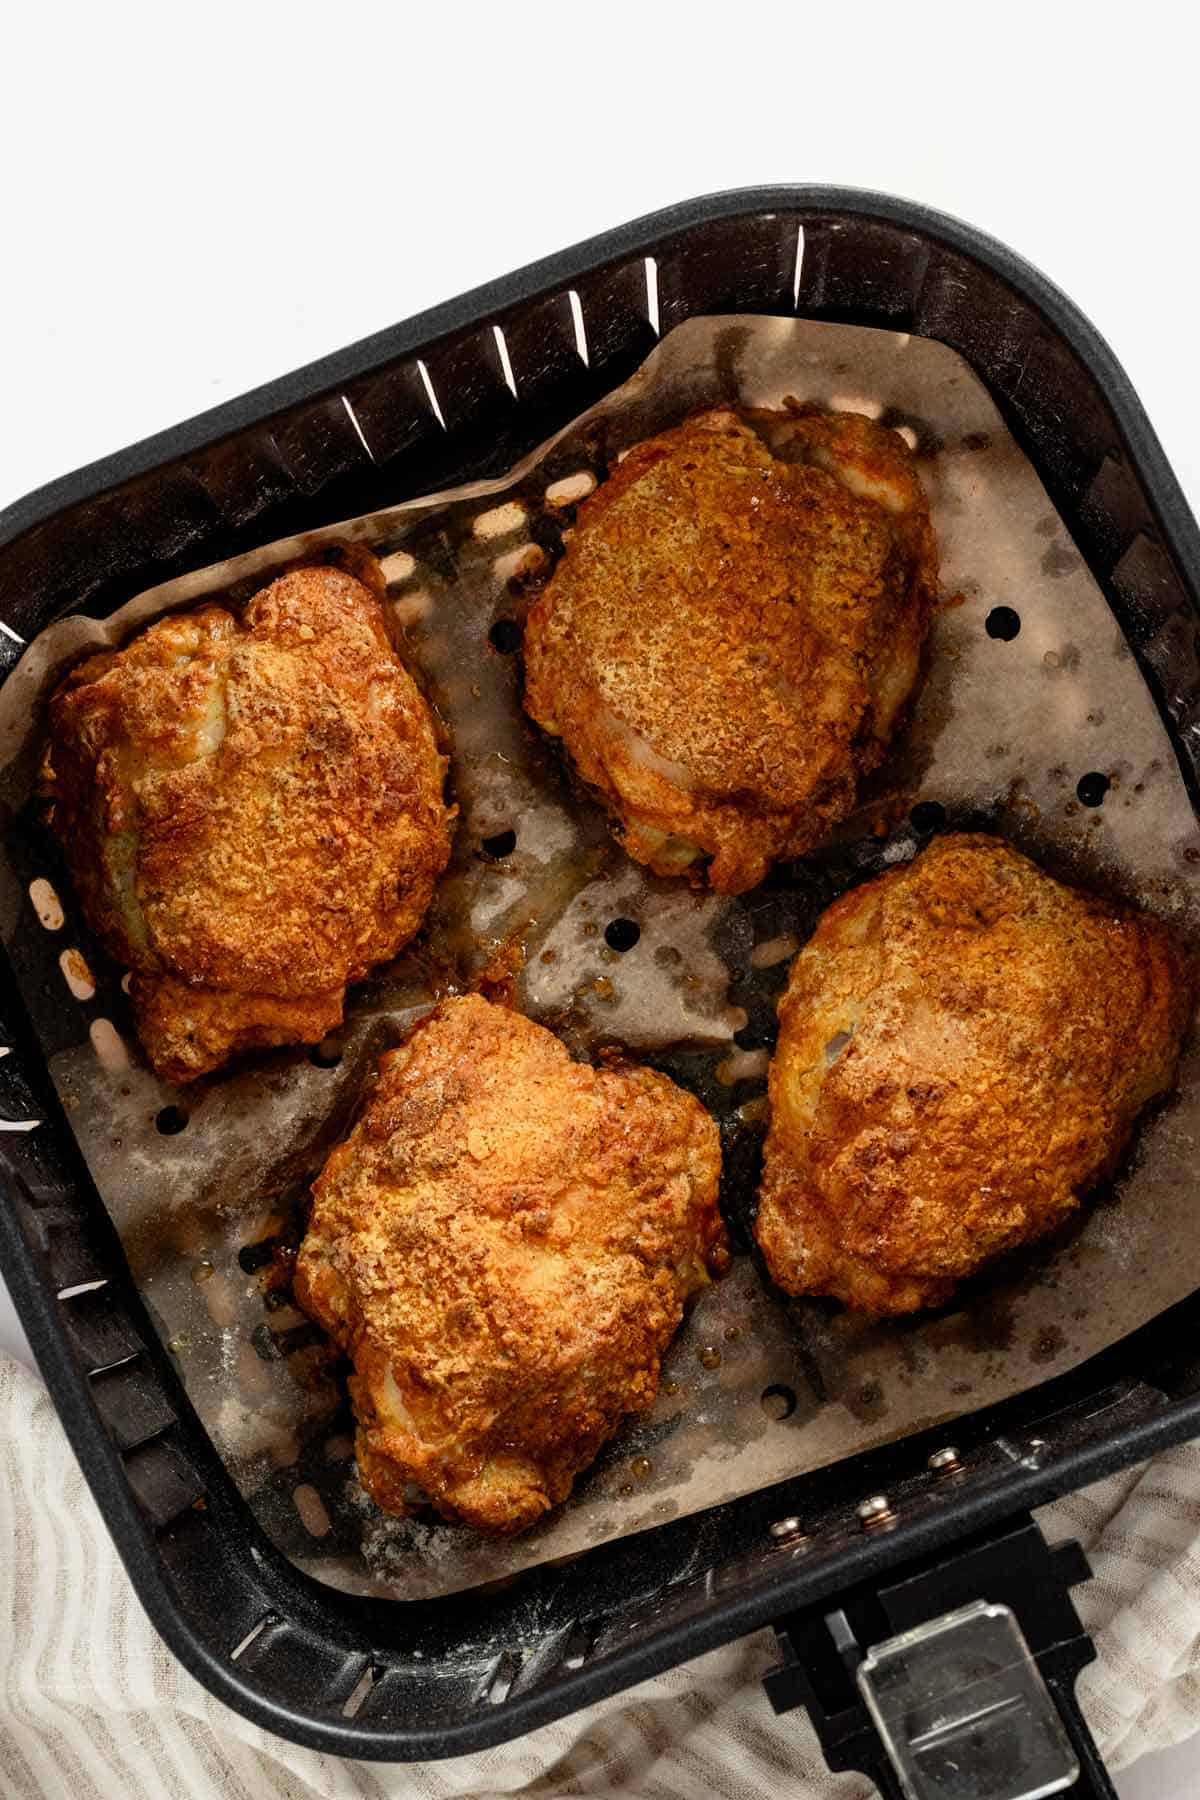 four chicken thighs in air fryer basket after cooking.